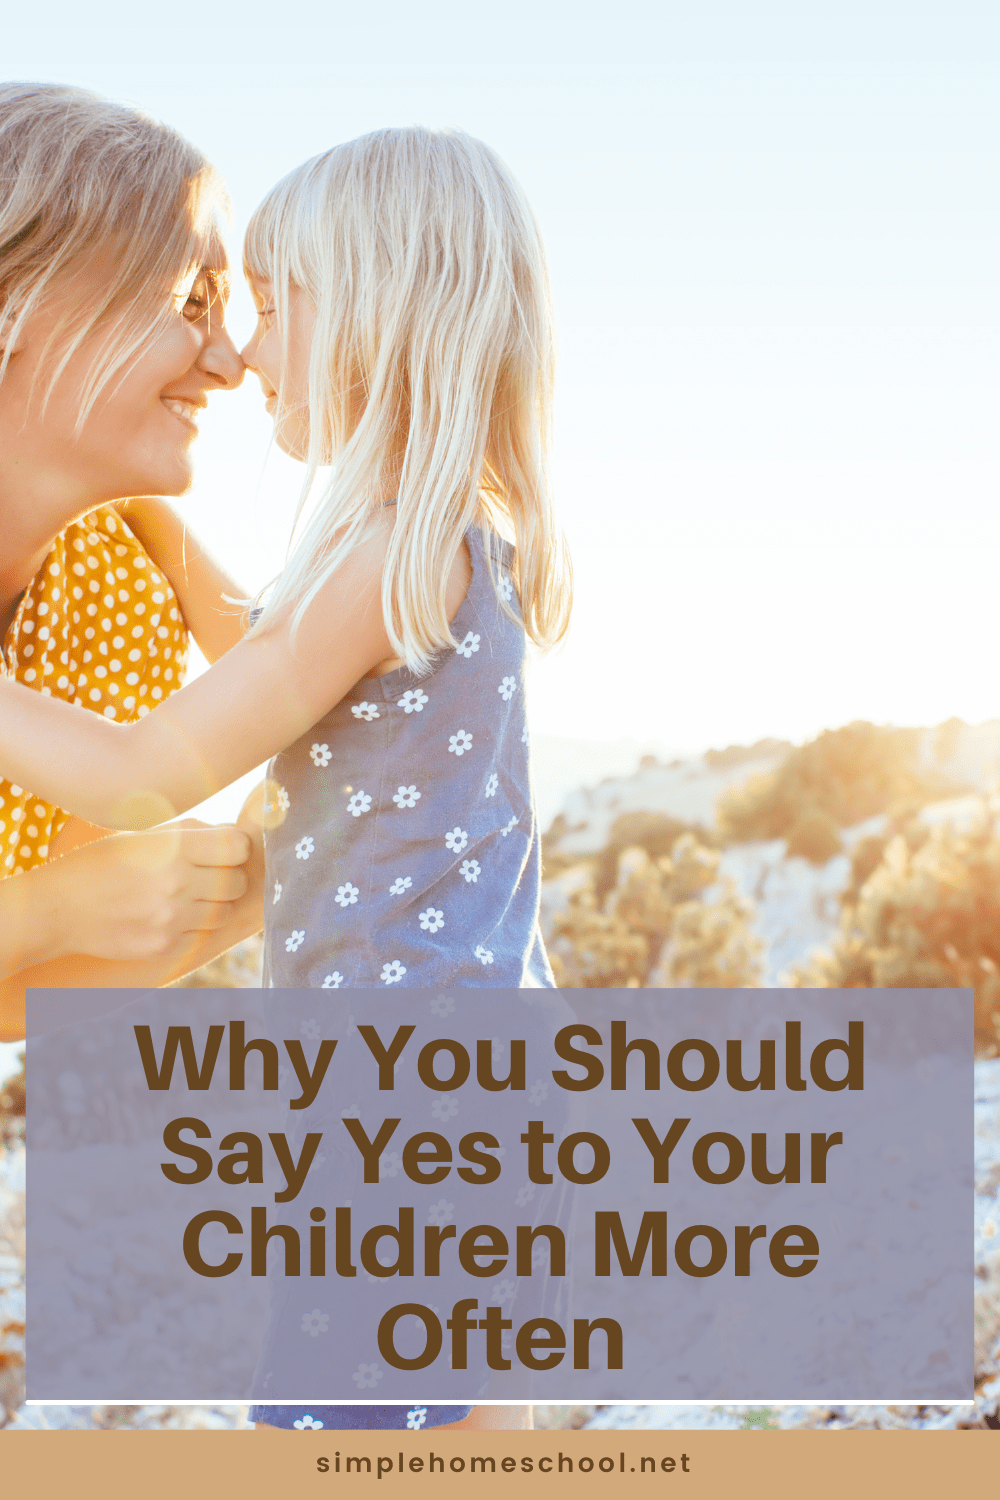 Why You Should Say Yes to Your Children More Often: Do you find yourself constantly saying "No" to your child?" In instances when you would typically say "No," ask yourself why not yes? #yesparenting #sayyes #parenting #motherhood #homeschool